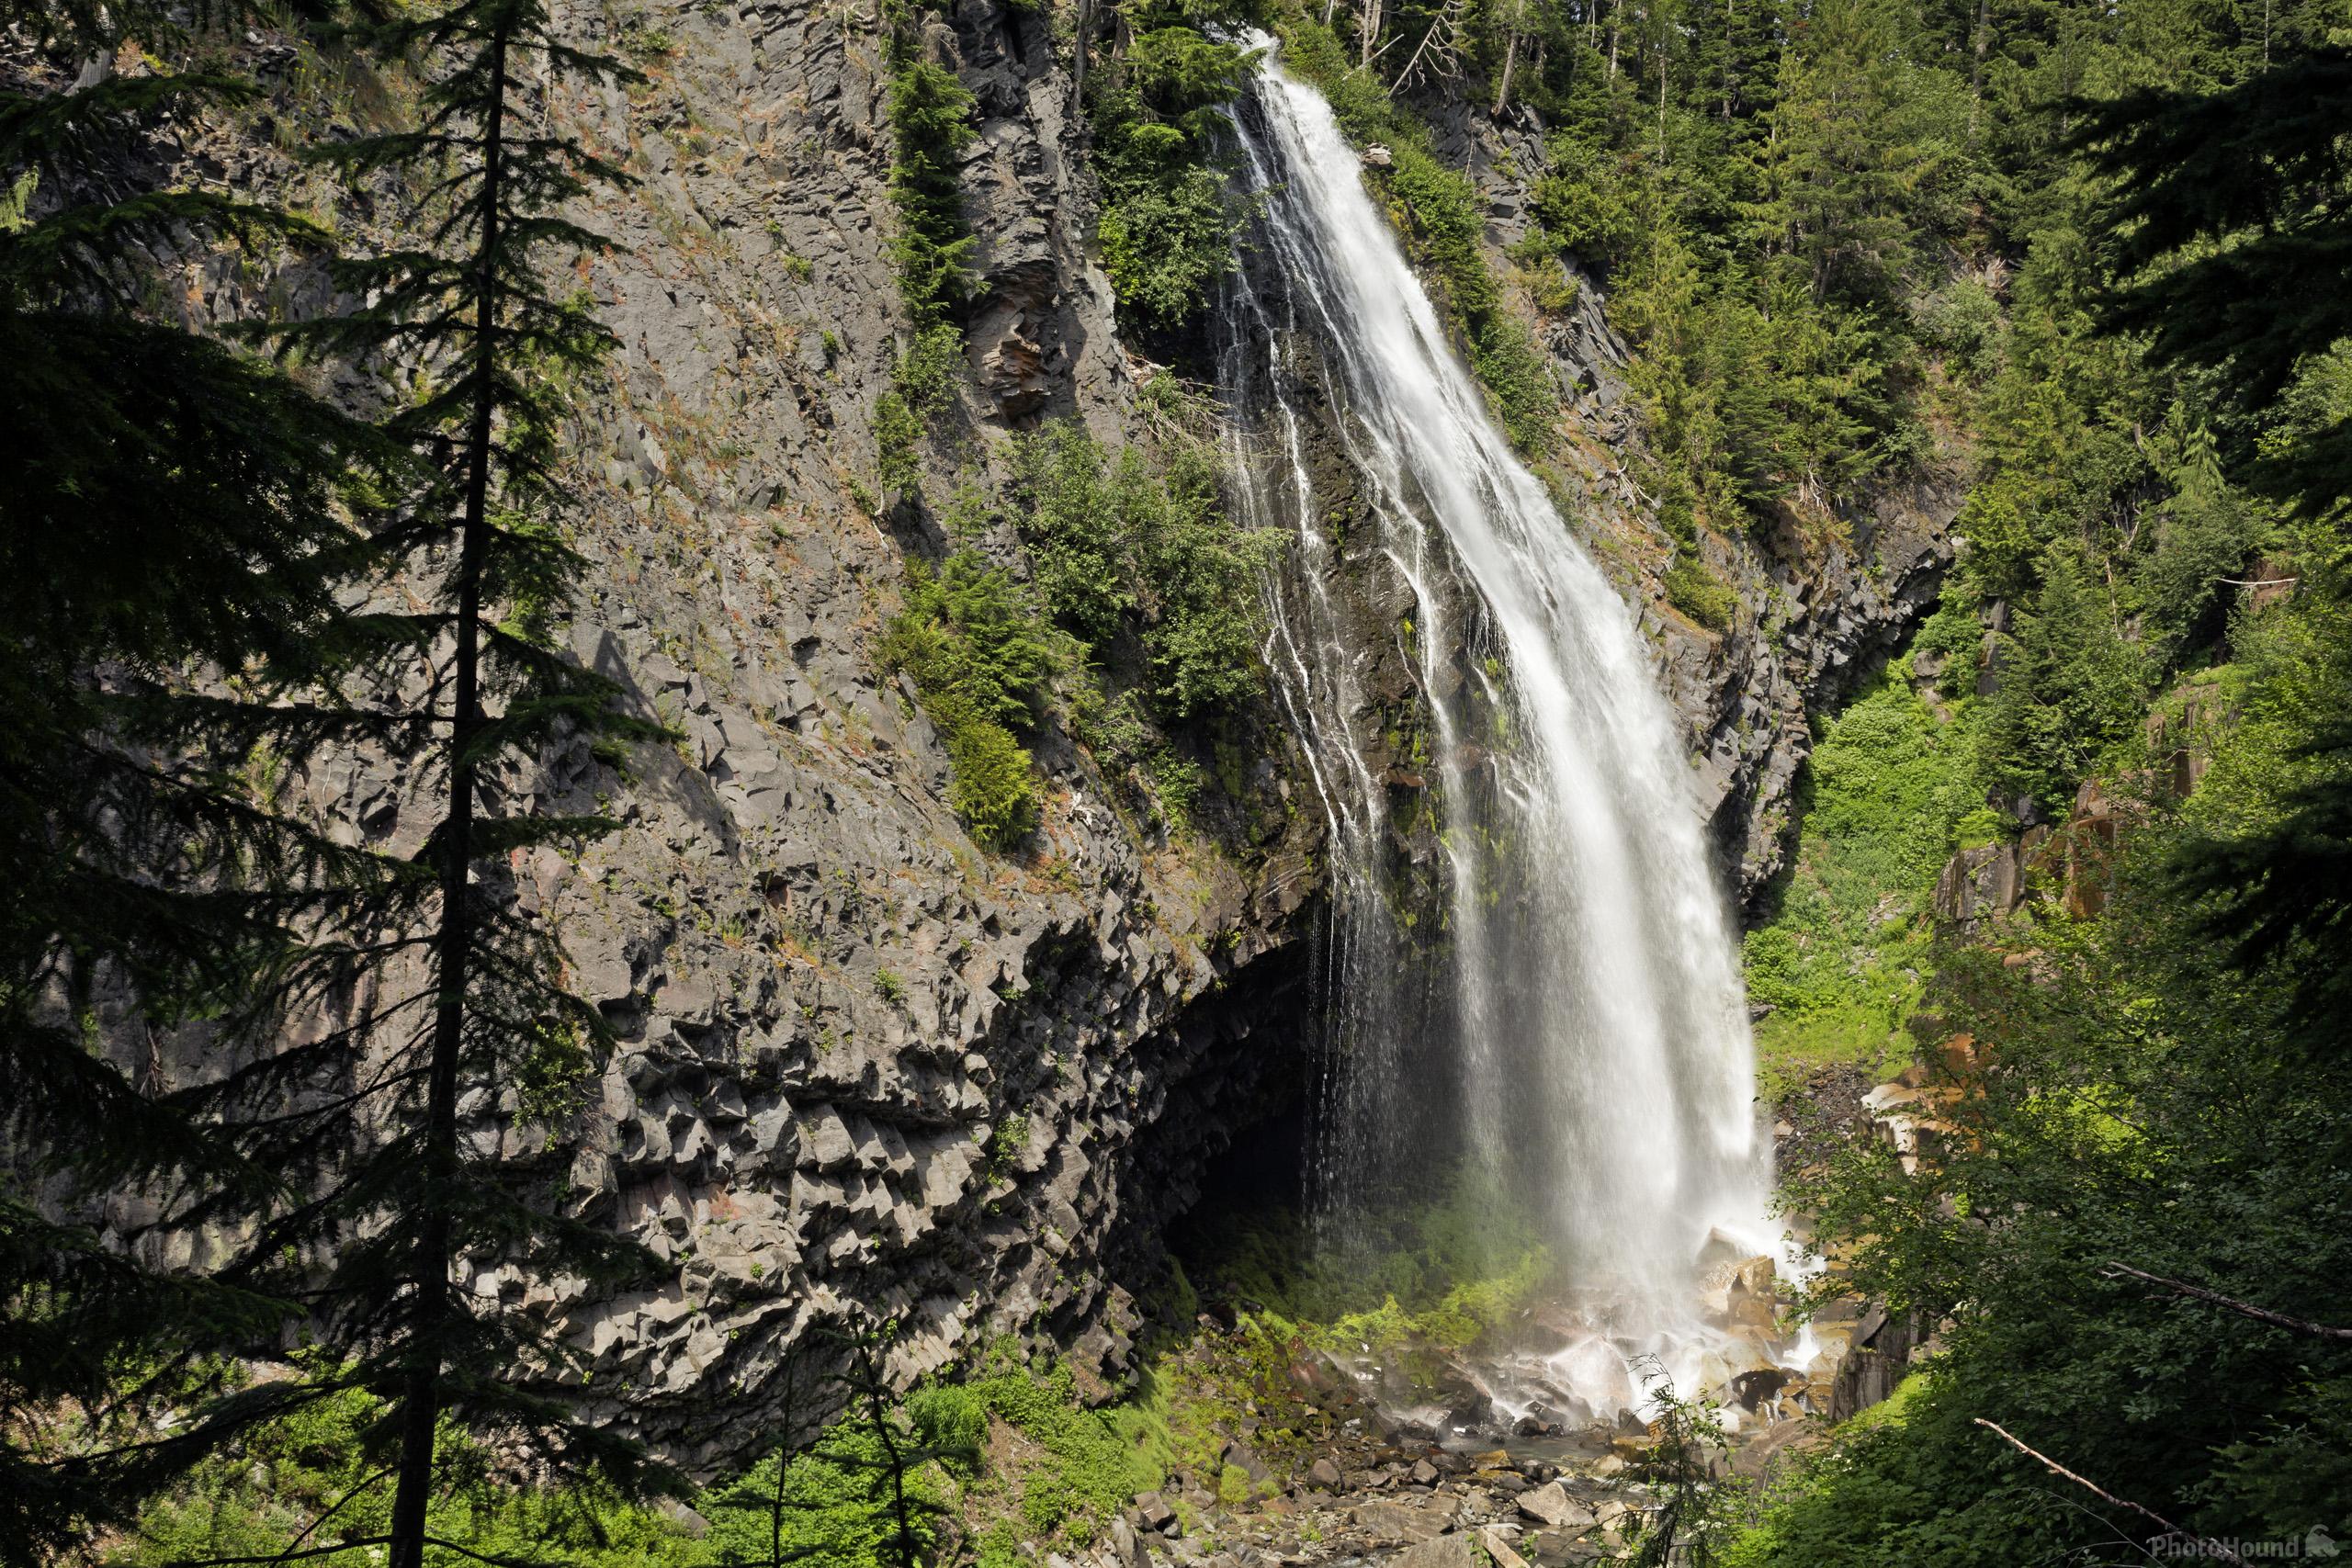 Image of Narada Falls by T. Kirkendall and V. Spring